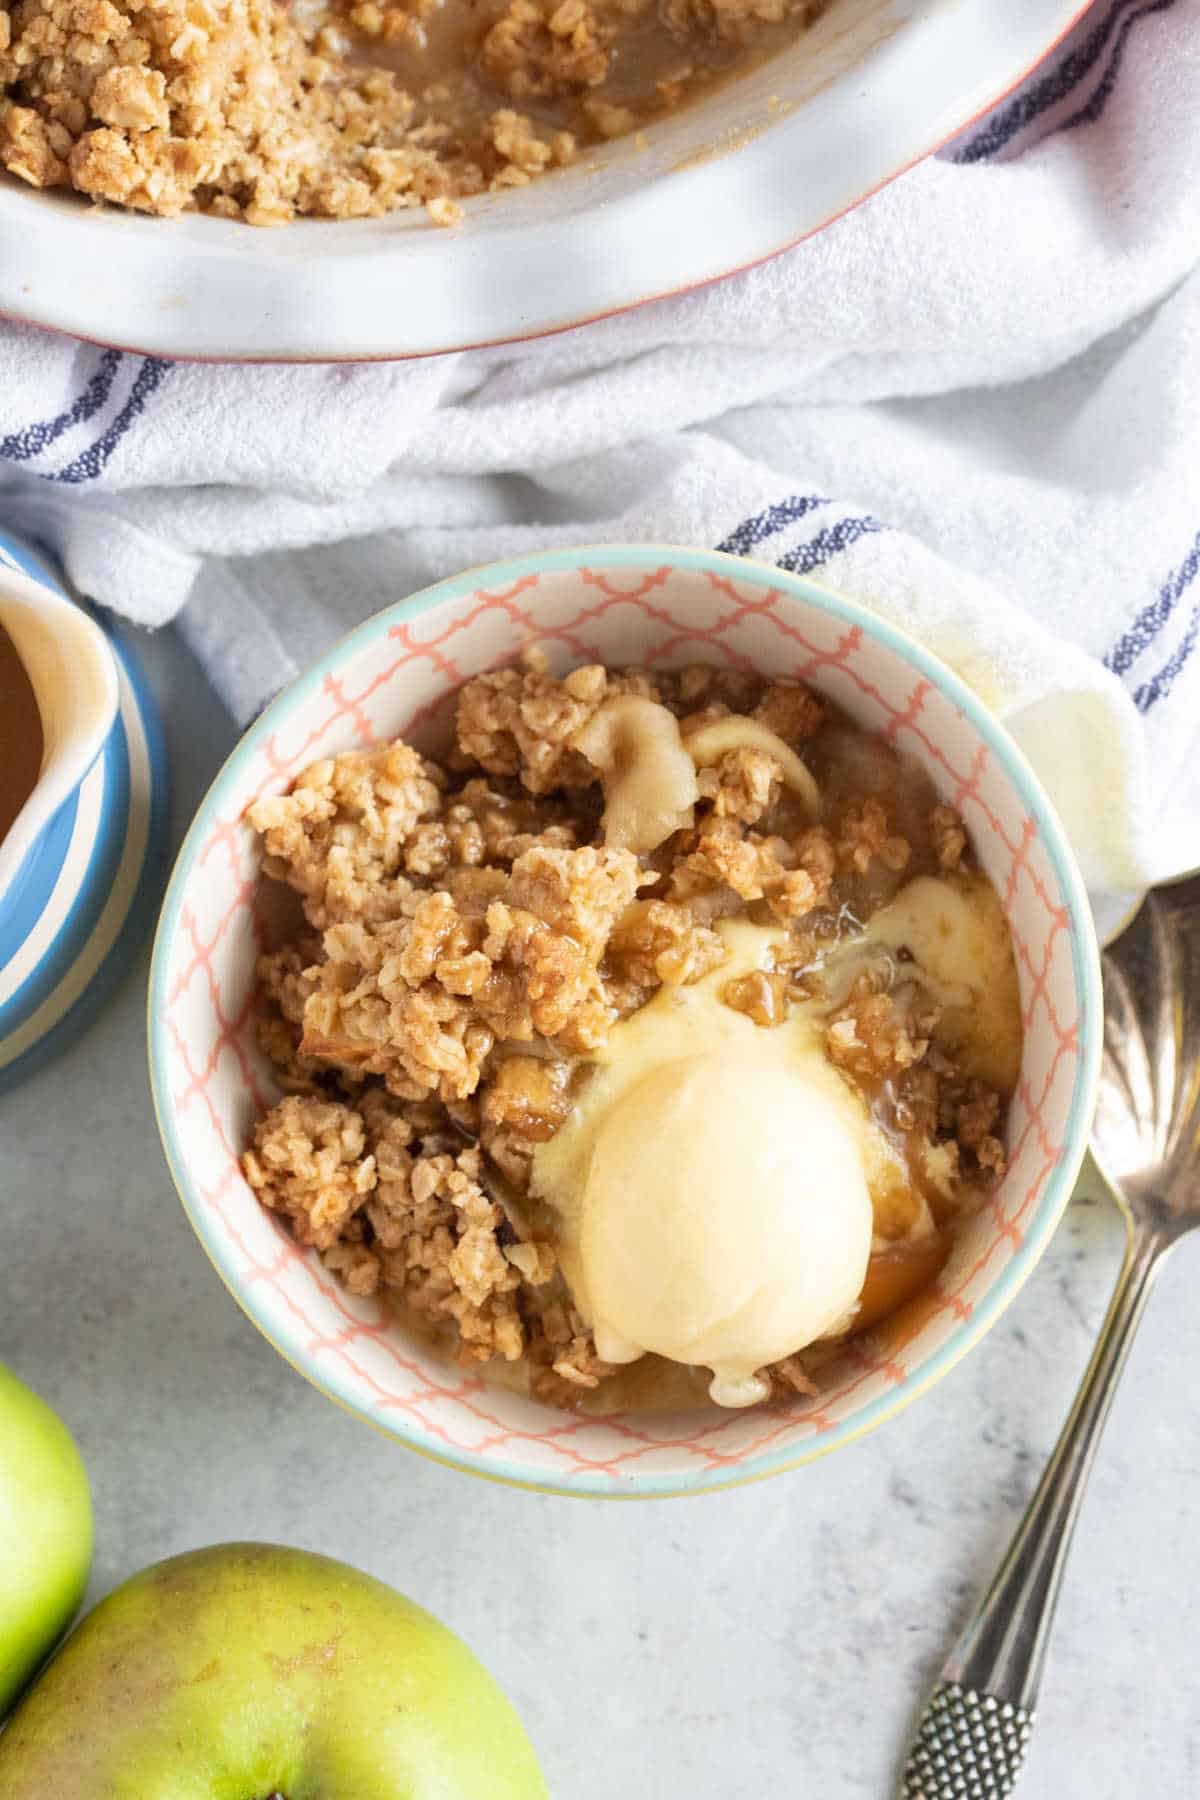 A bowl of toffee apple crumble with a scoop of vanilla ice cream on top.